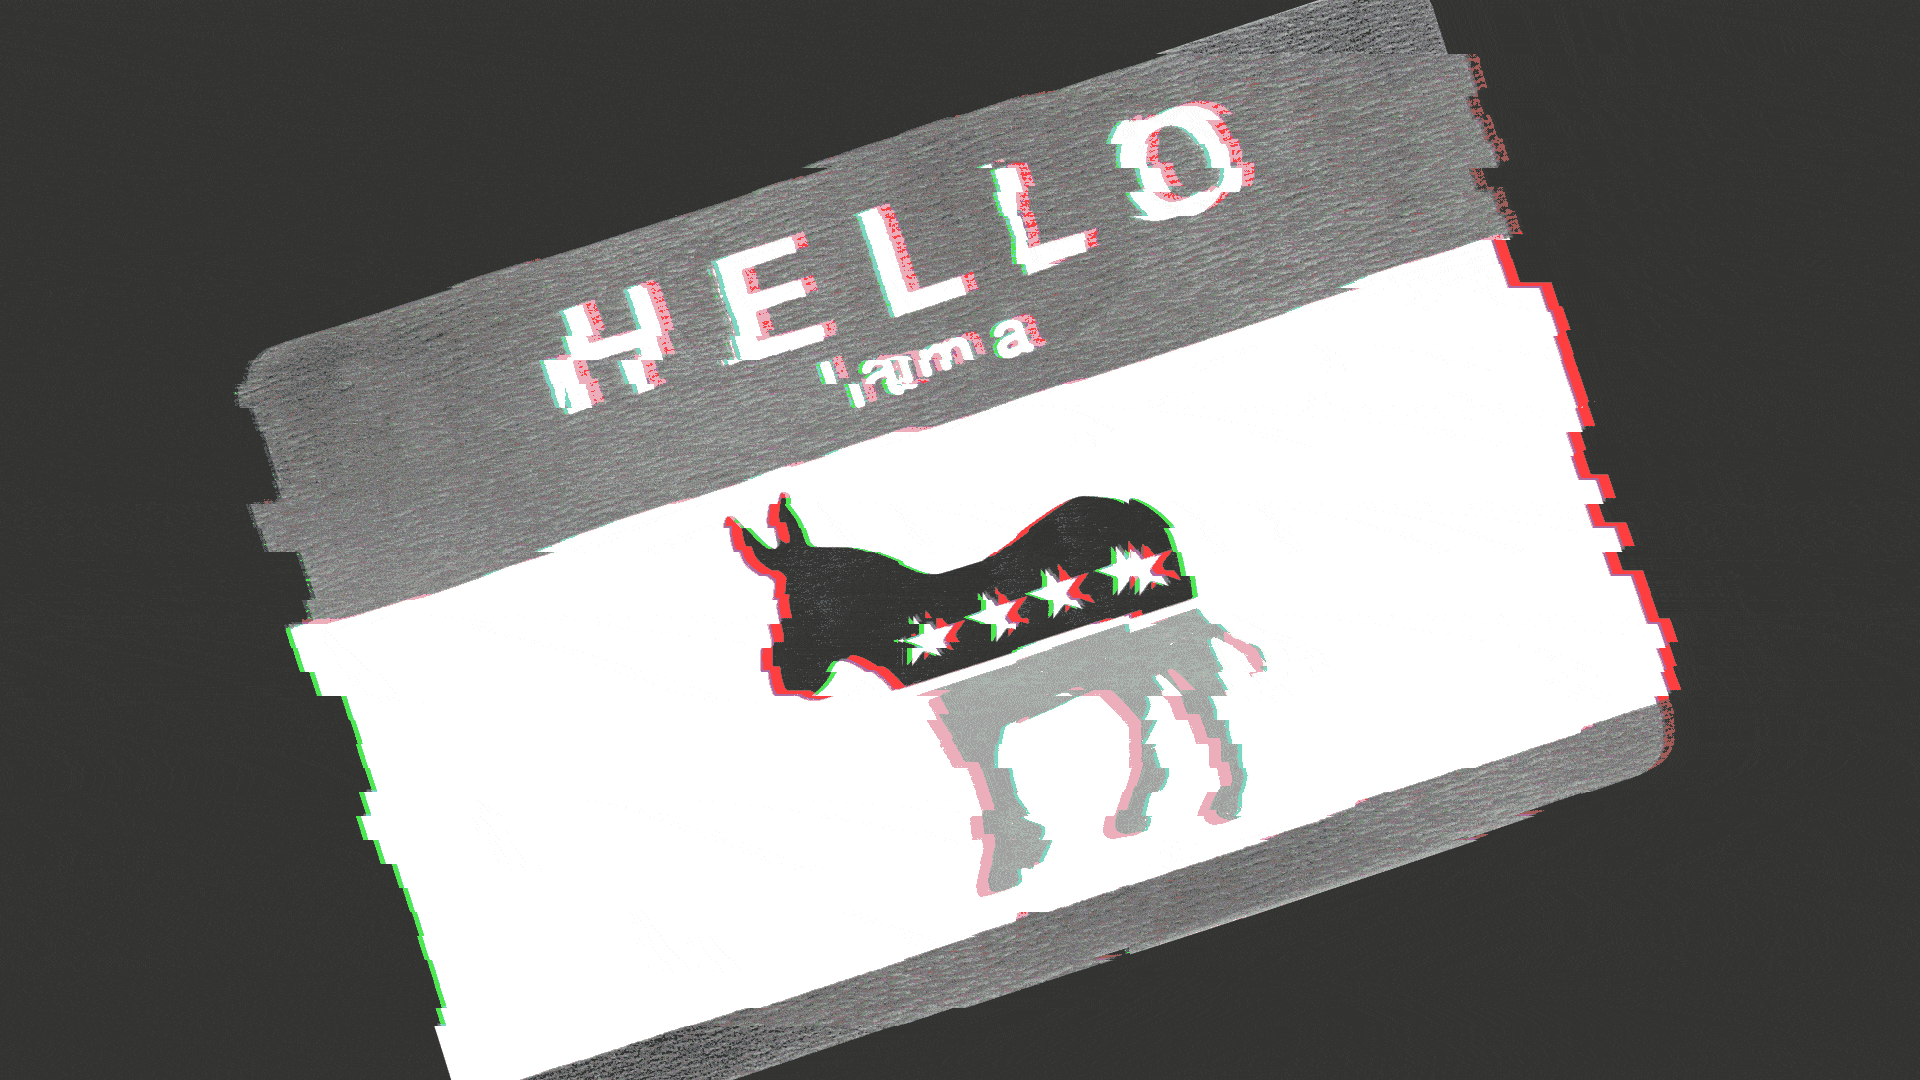 Illustration of a name tag, with a Democratic Party donkey symbol instead of a name, changing to a Republican Party elephant symbol.